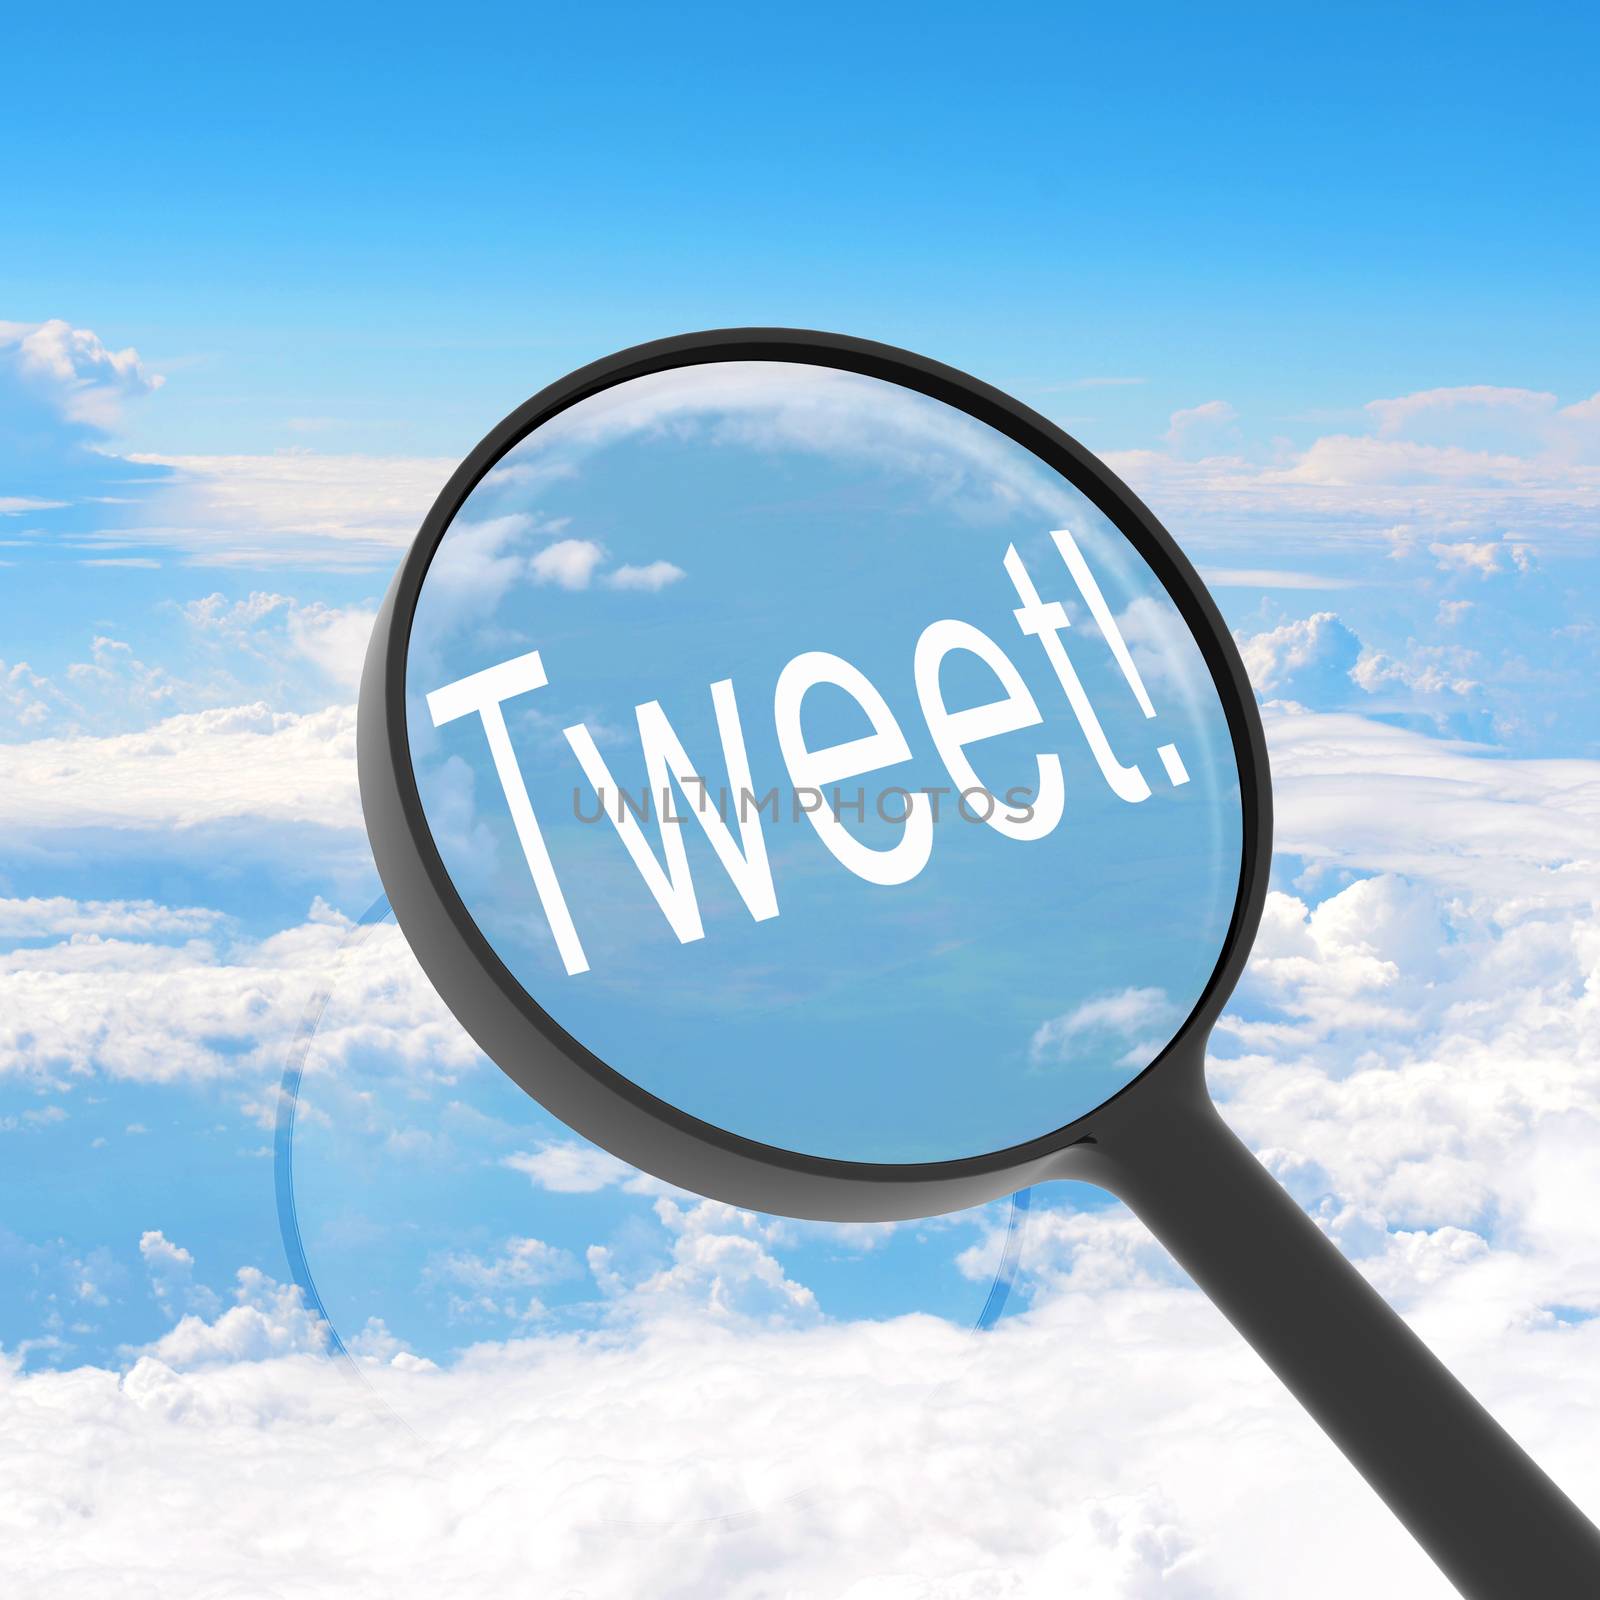 Magnifying glass looking Tweet. Clouds on background. Business concept